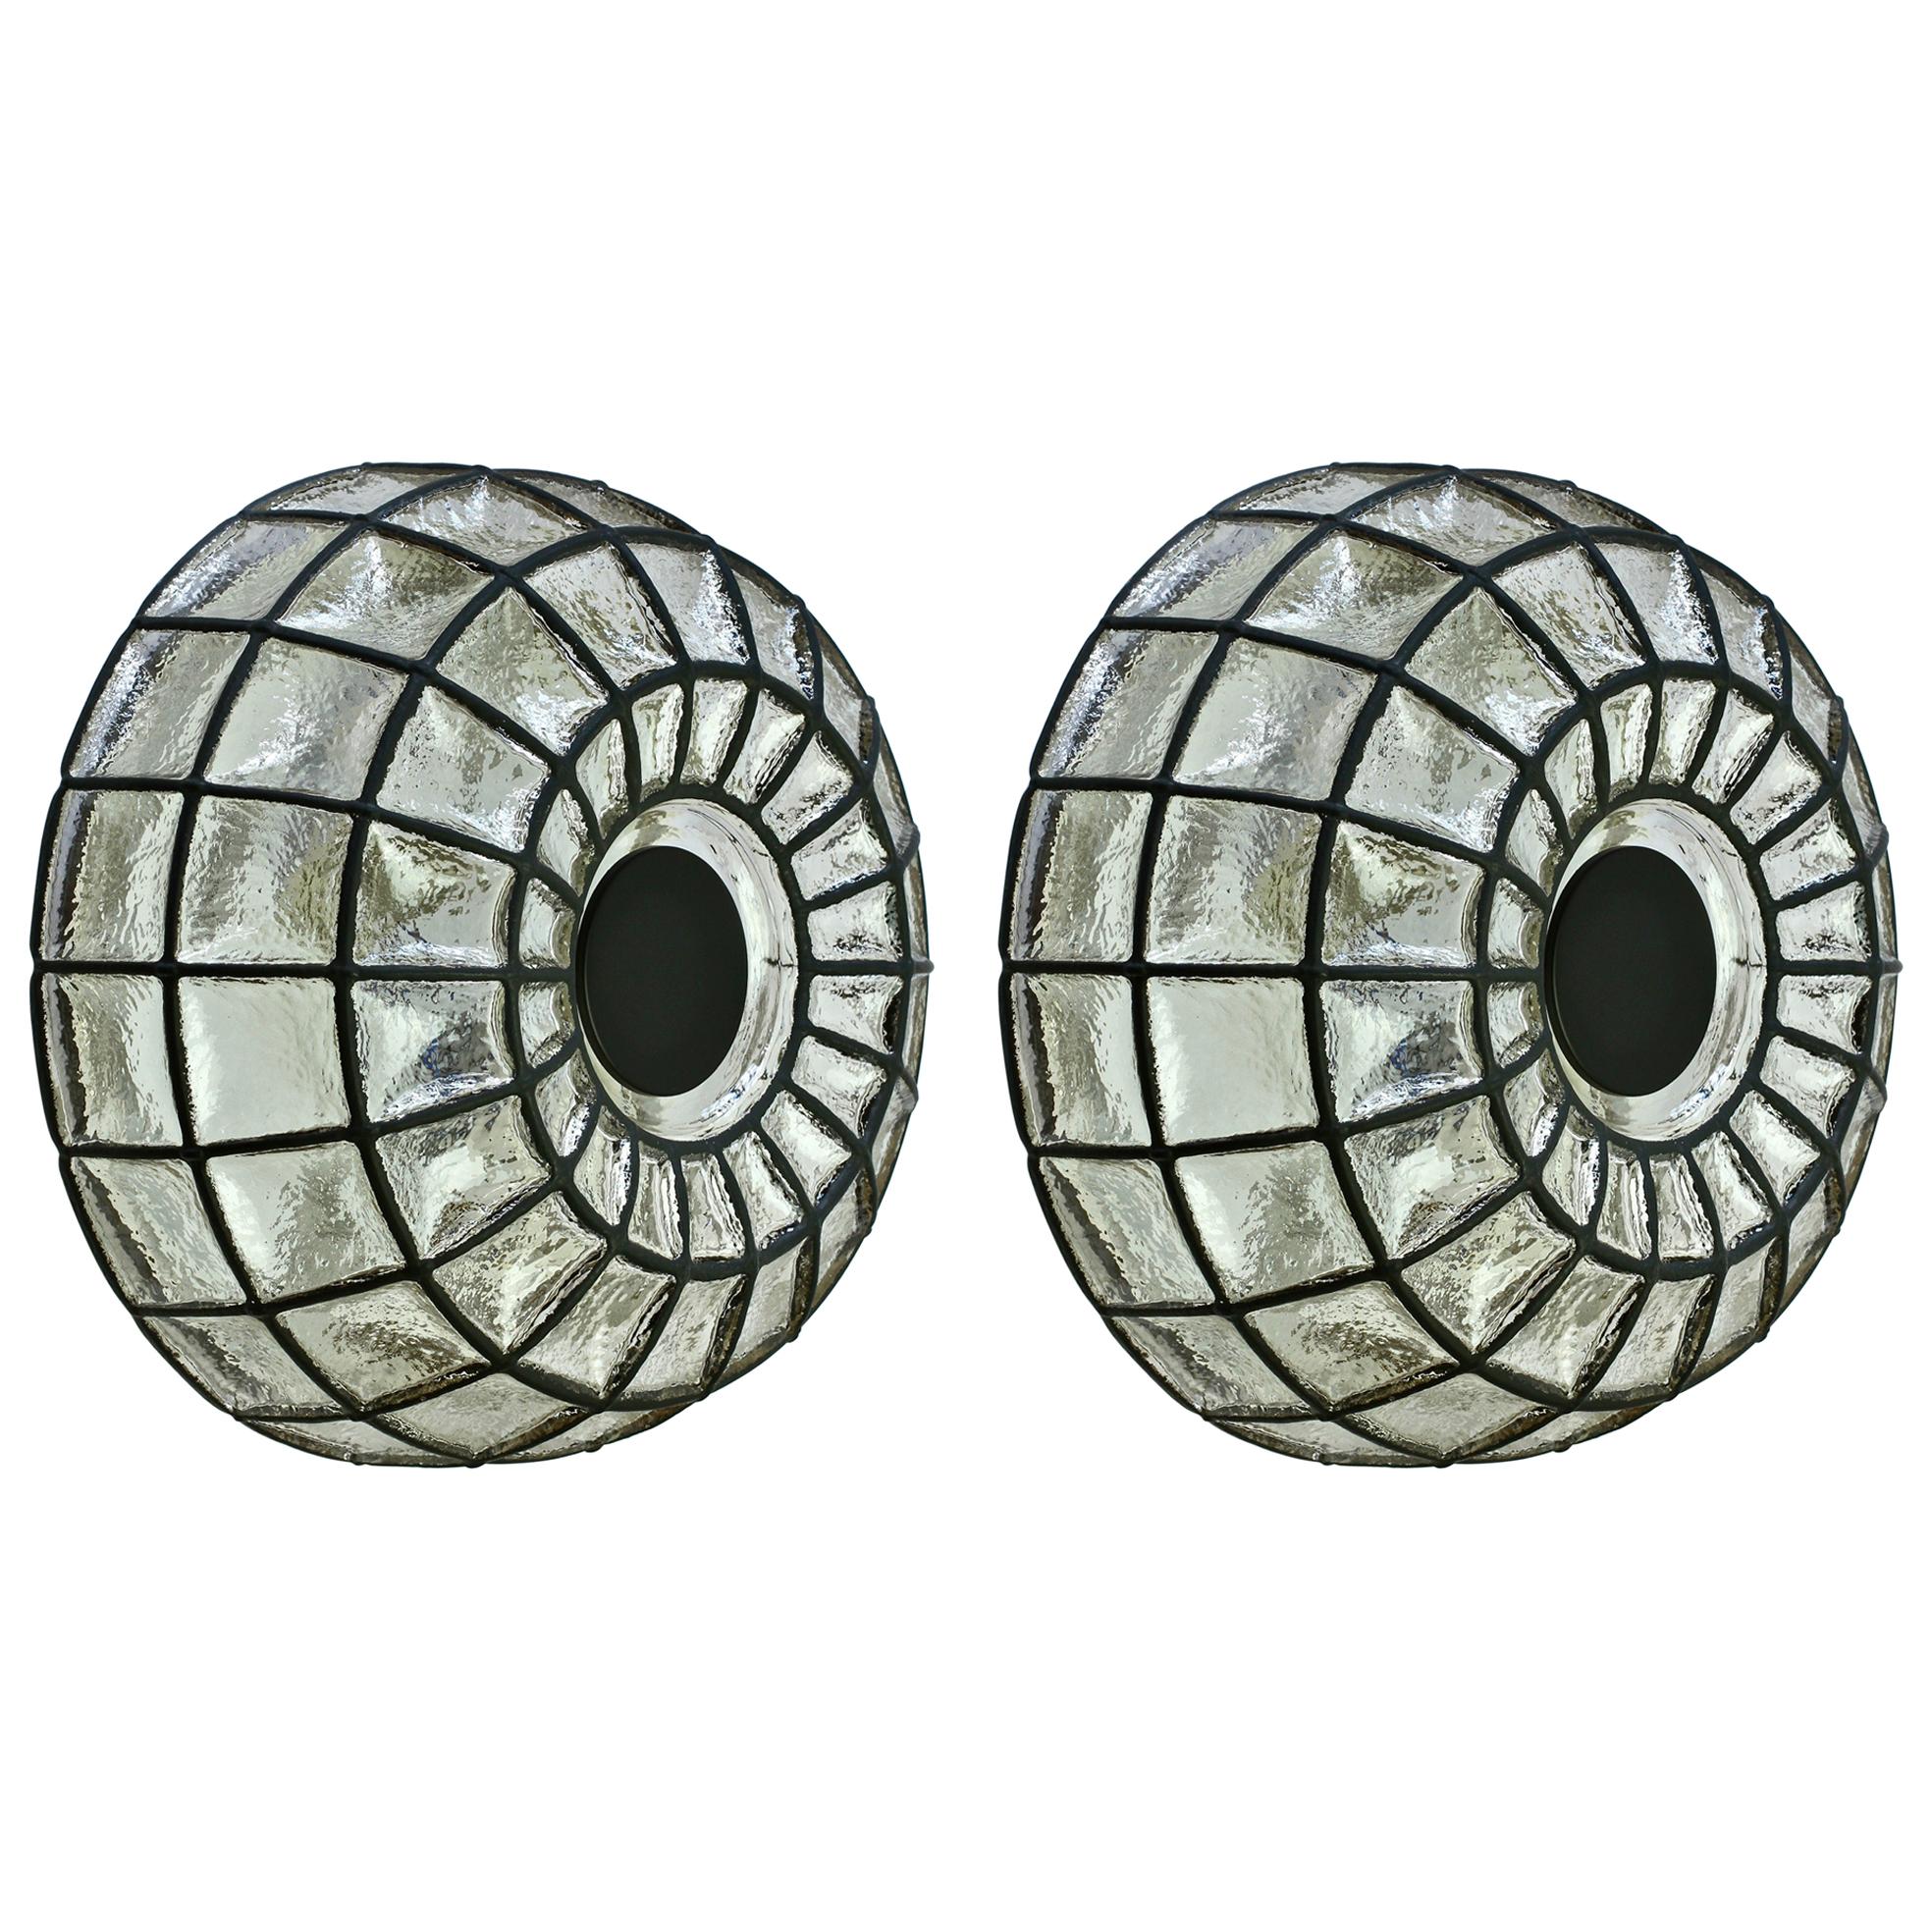 Limburg Pair of Large Vintage 1960s Black Iron & Glass Domed Wall Lights / Lamps